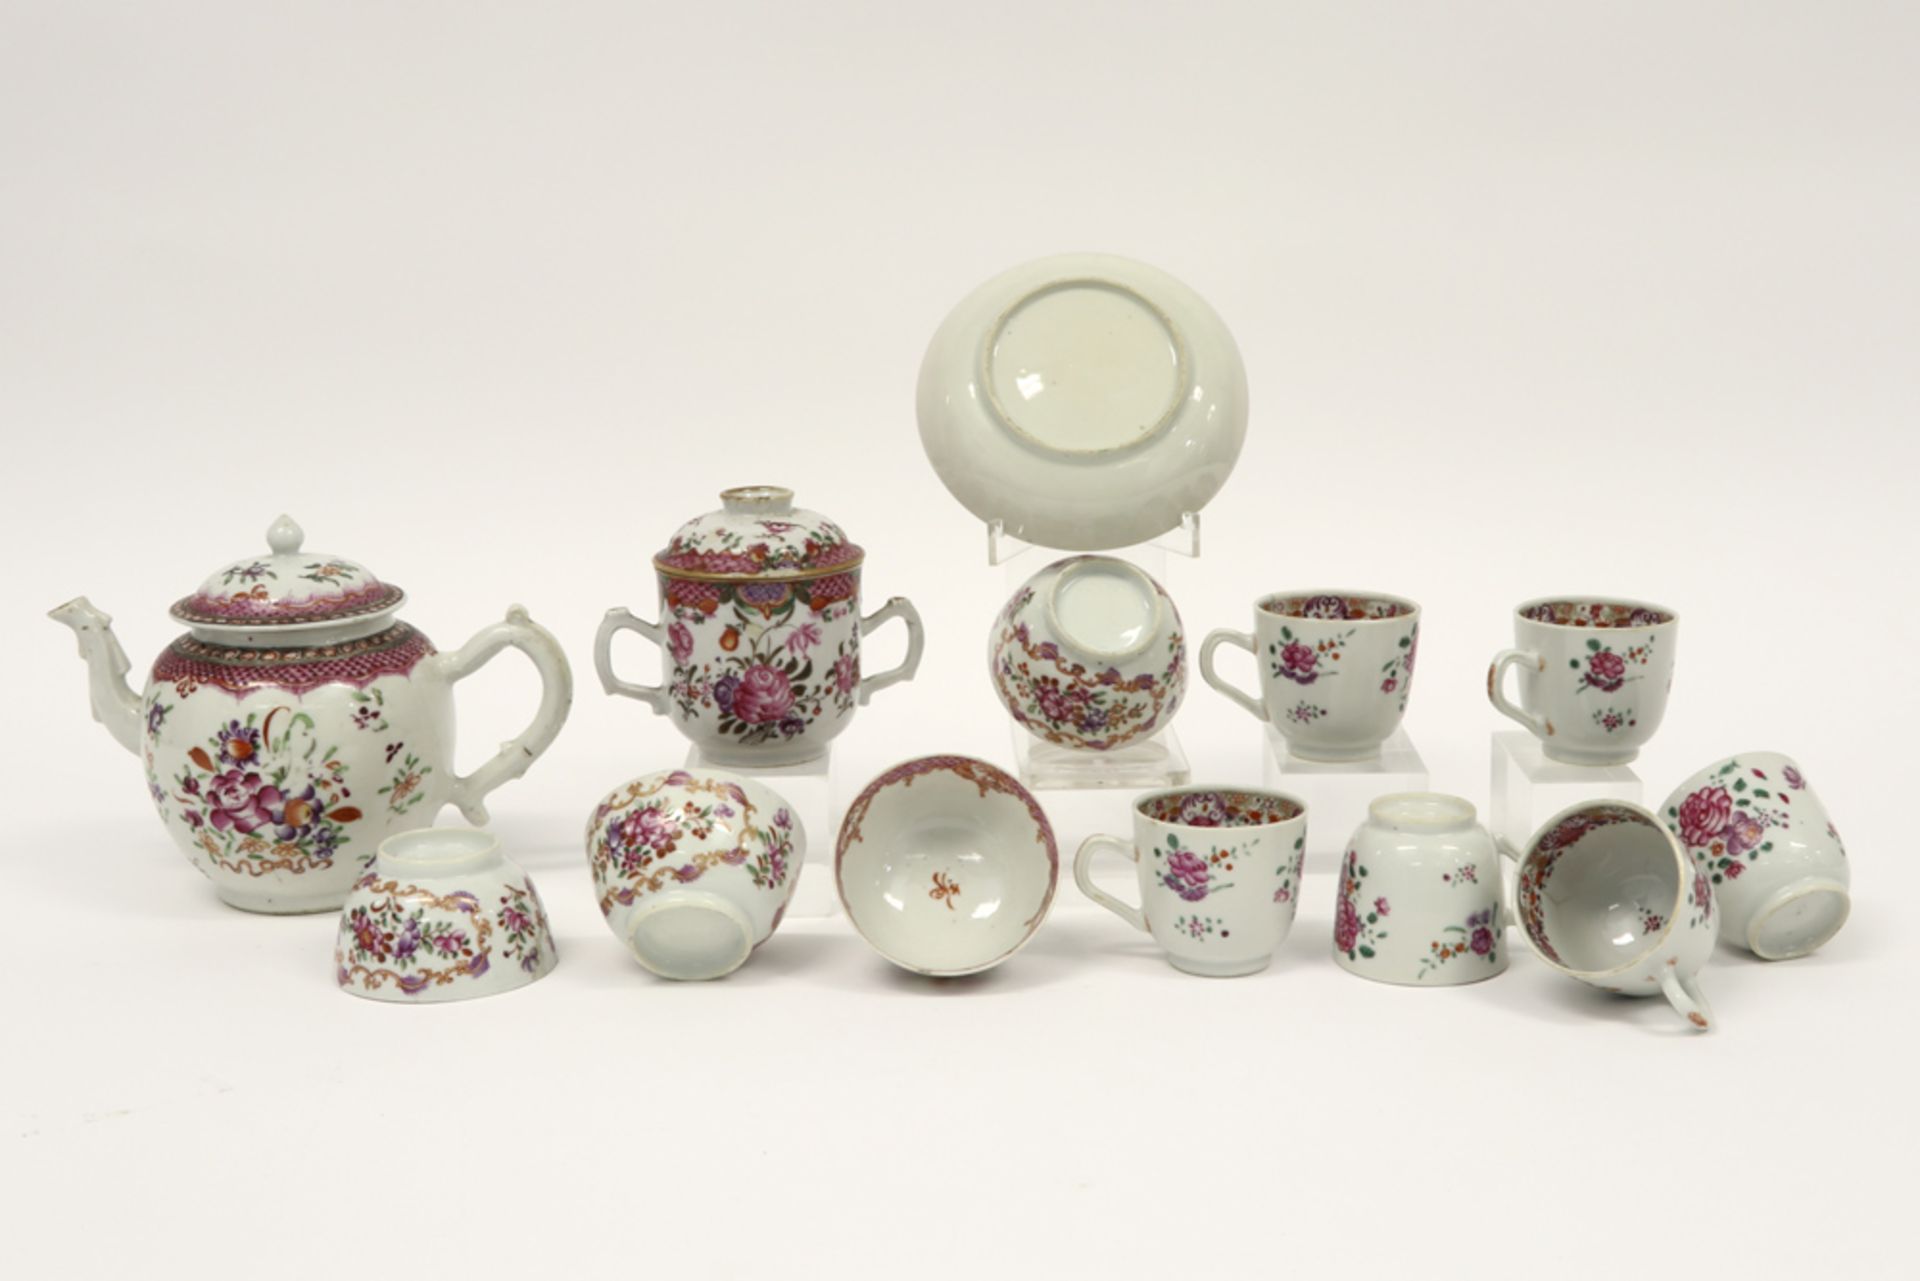 18th Cent. Chinese 13pc teaset in porcelain with Famille Rose decor with cups and saucers, - Image 2 of 2